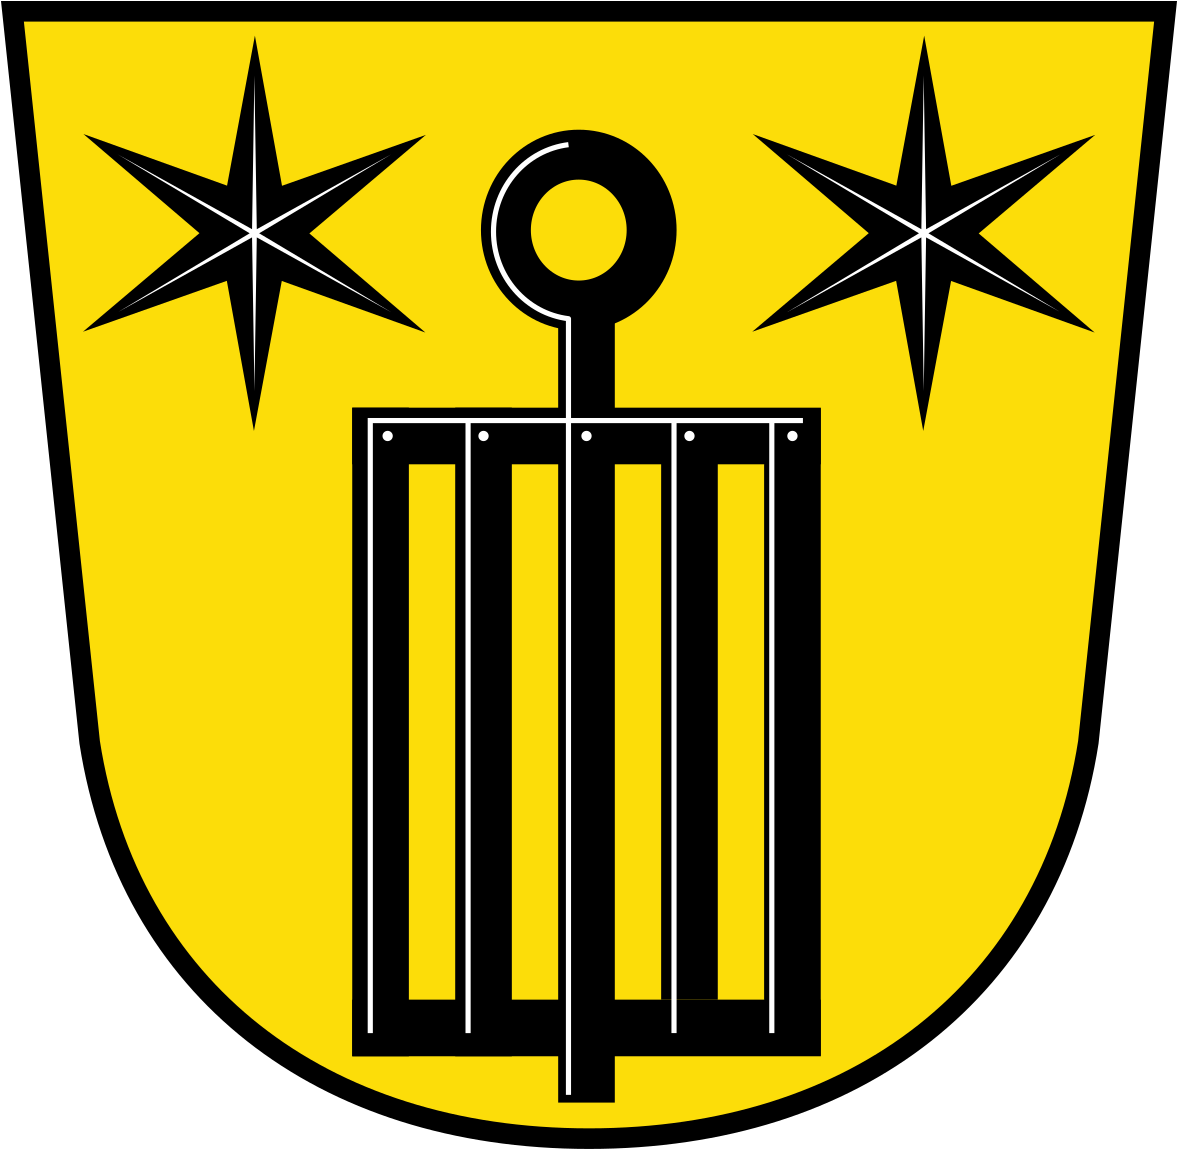 A Yellow Shield With Black Stars And A Black And Yellow Shield